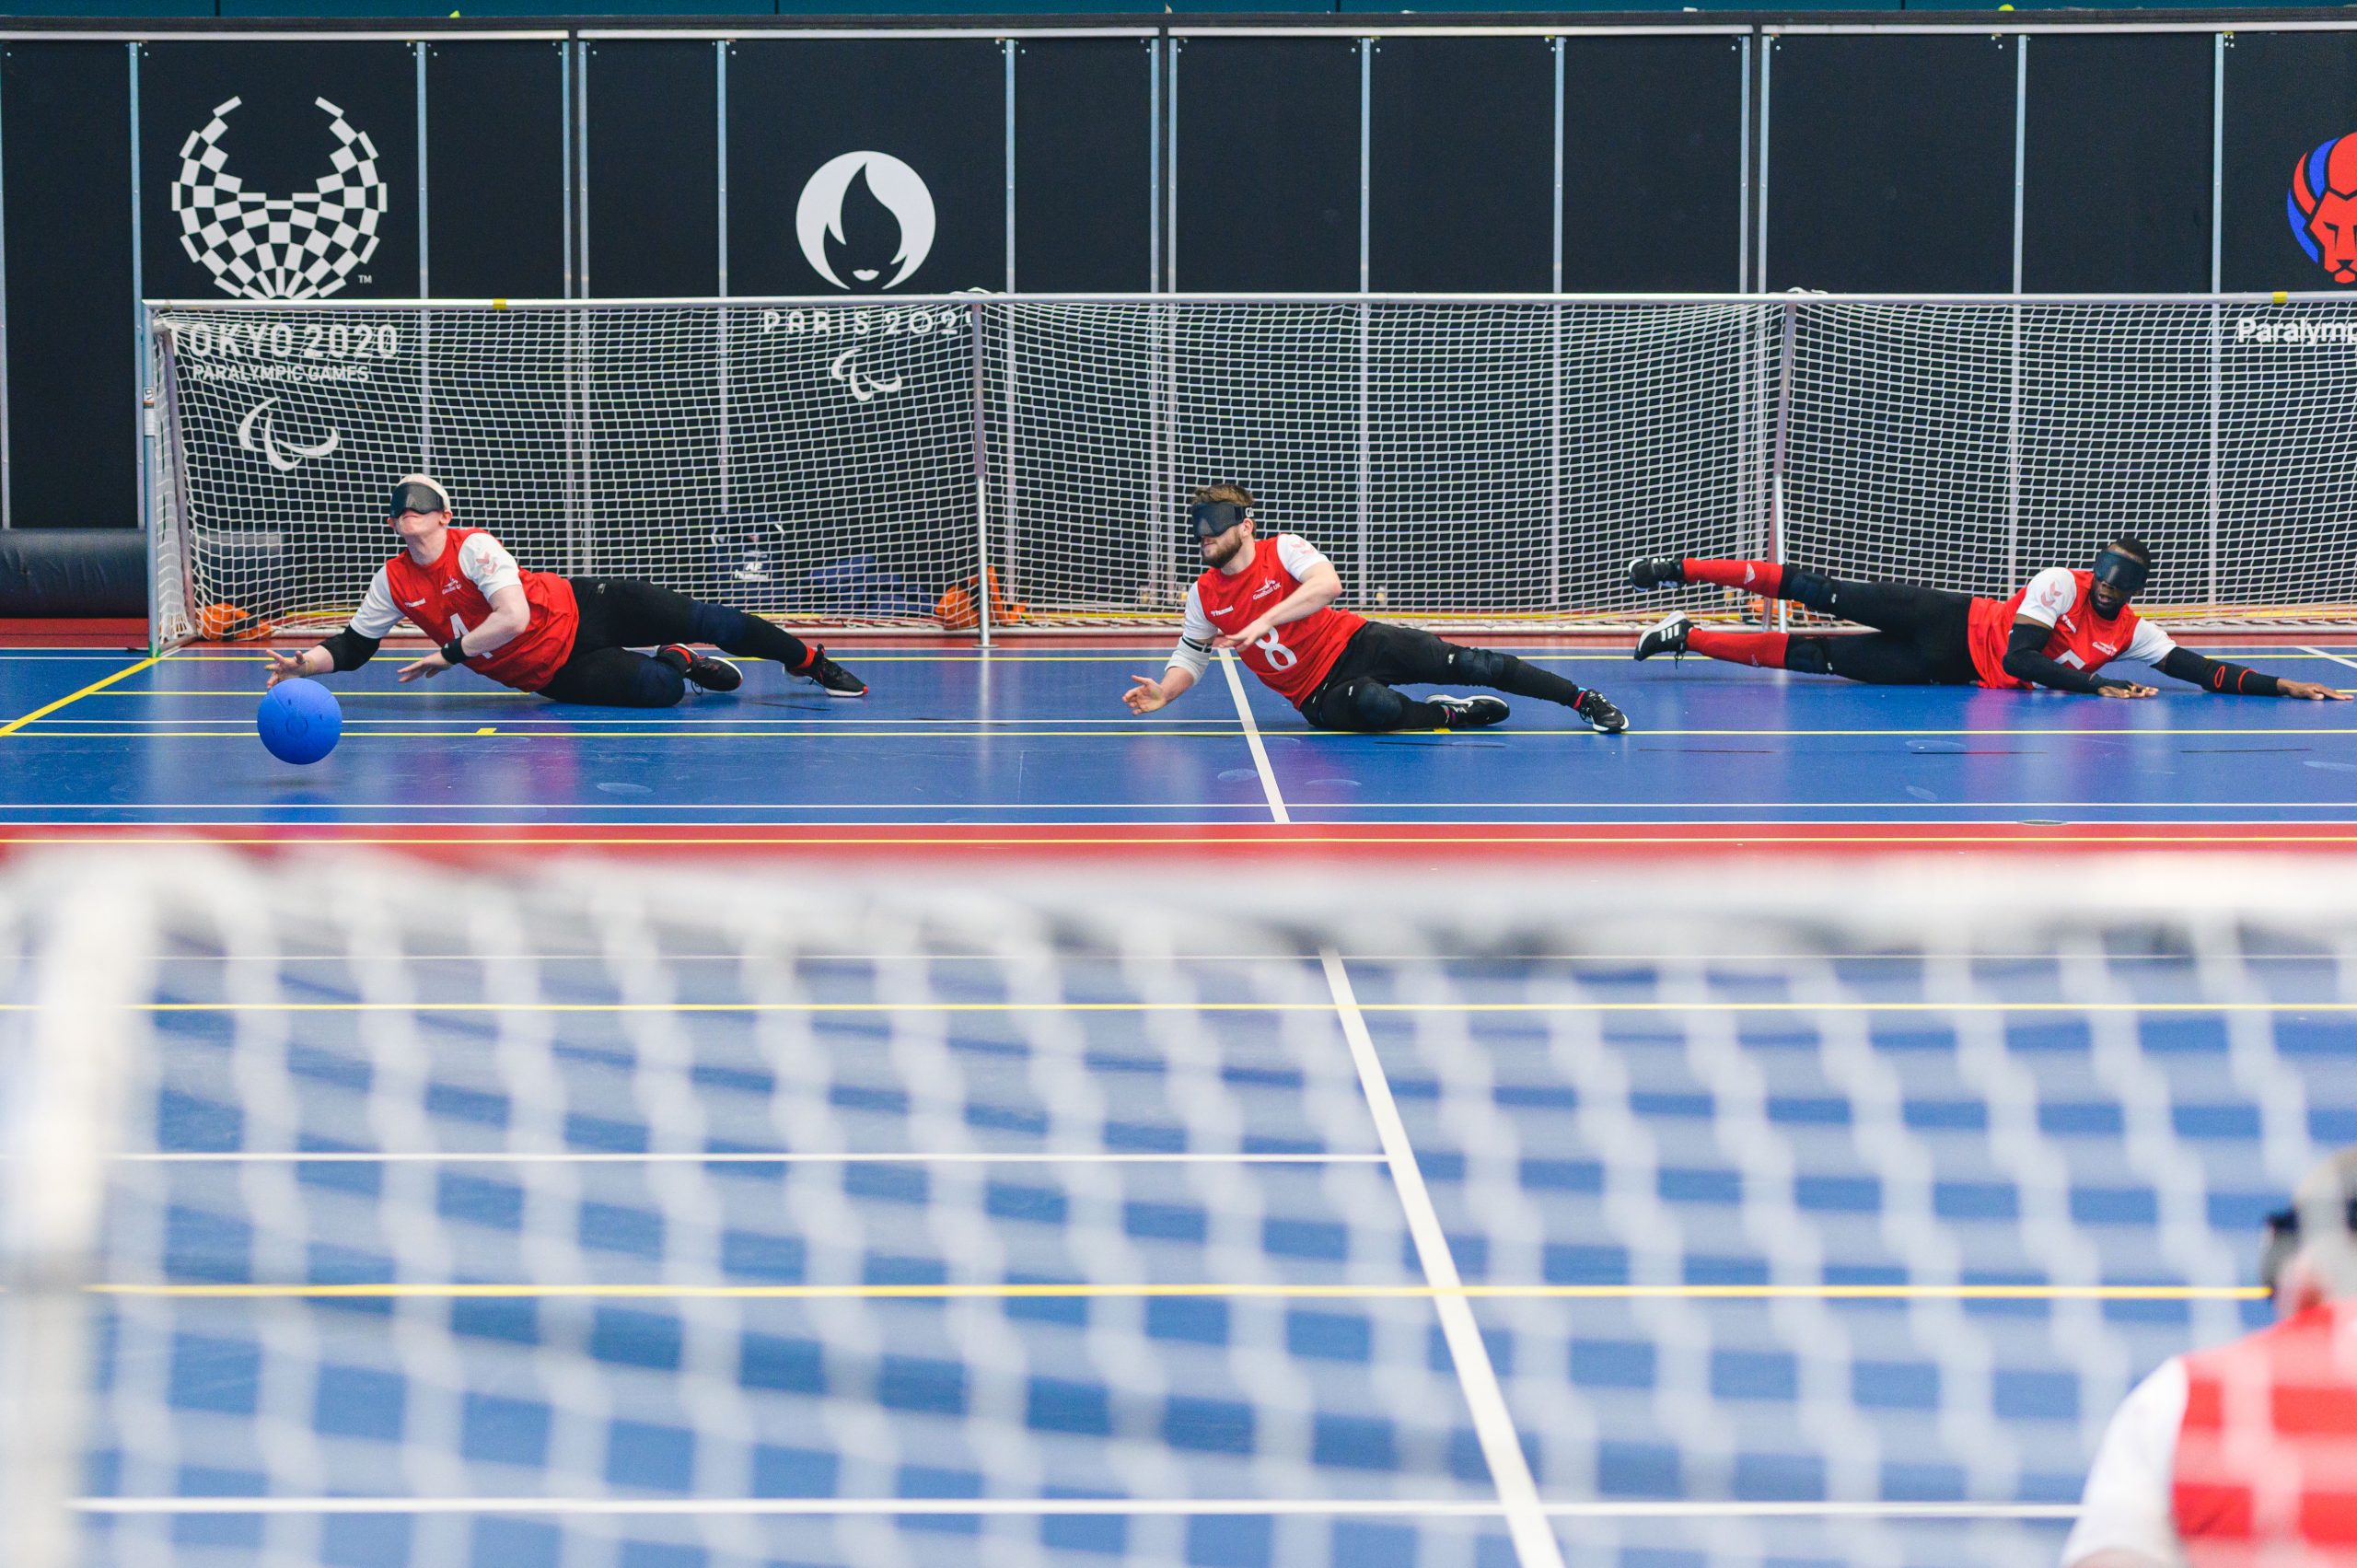 Wide angle shot from behind the goal during a GB training camp showing three of GB Men in the far goal end ready to defend